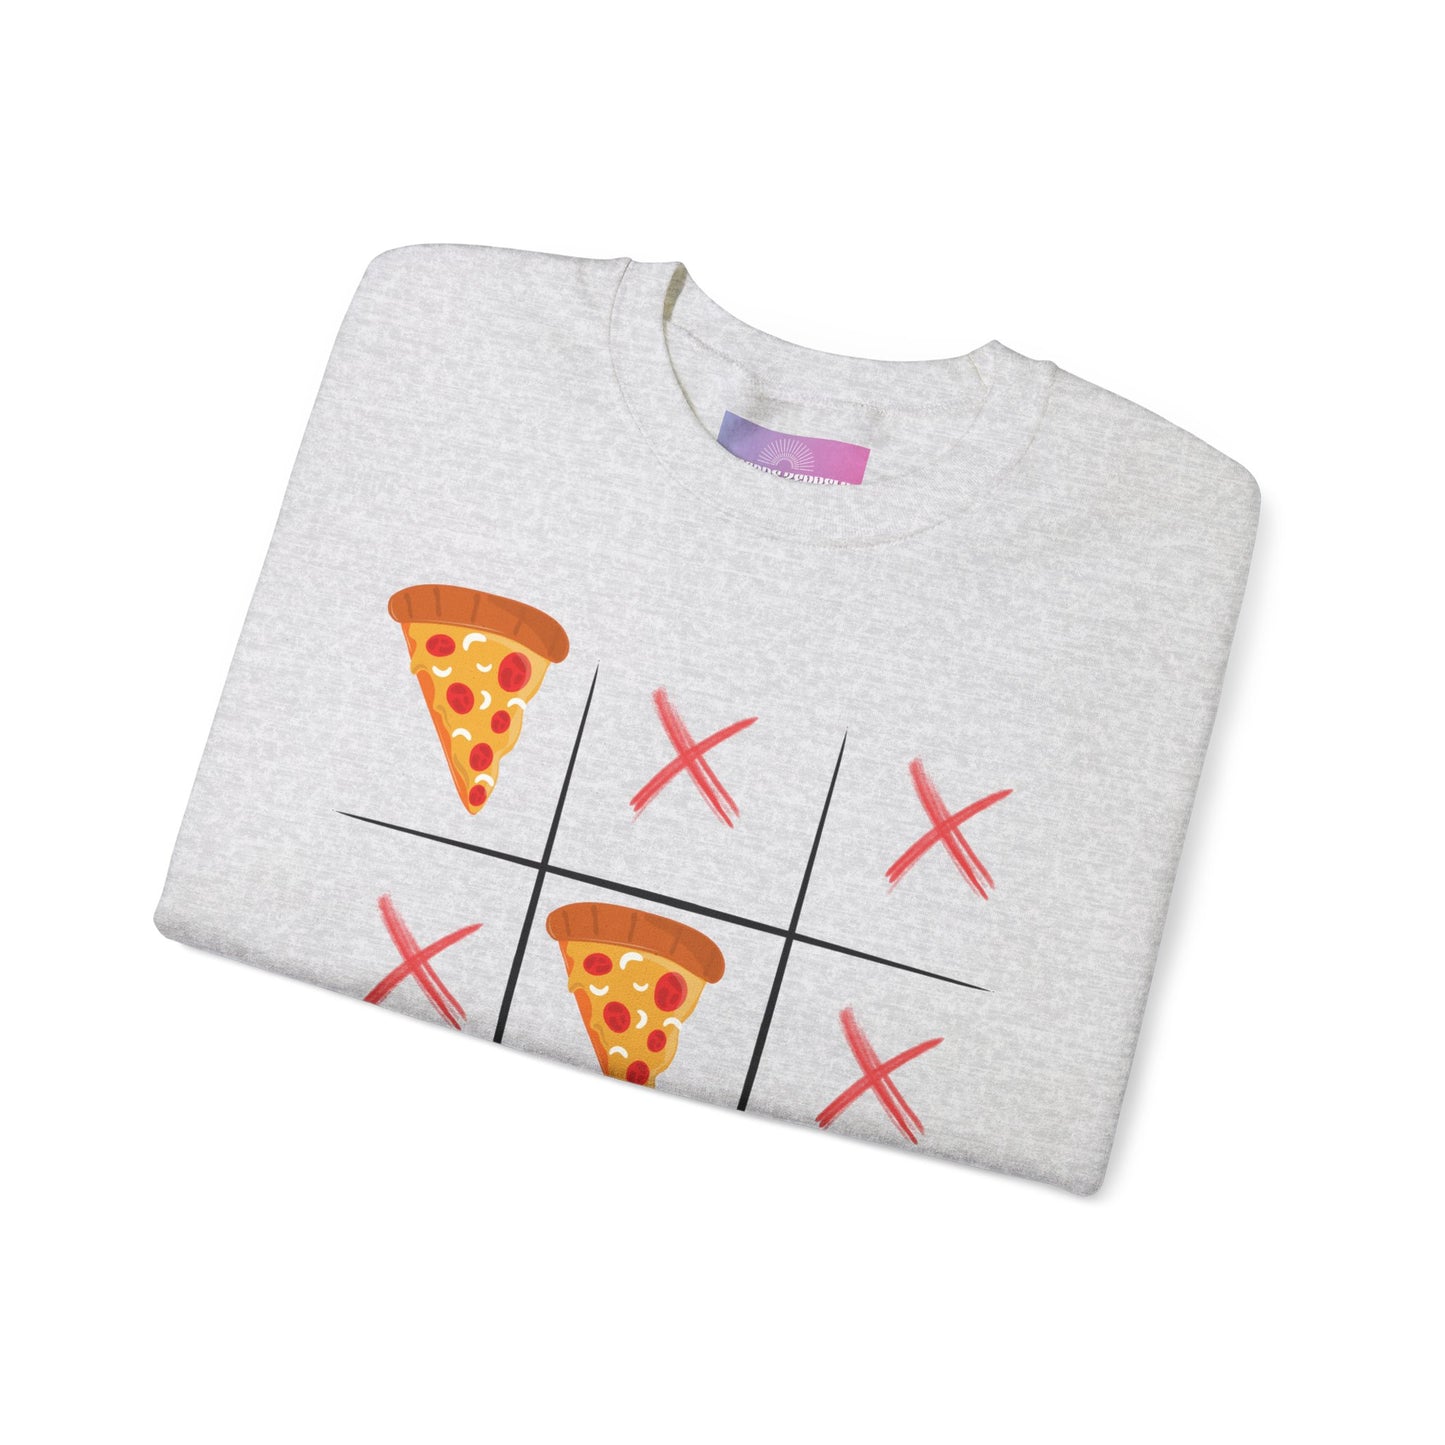 Valentines Day Pizza Slice Sweatshirt, Tic-Tac-Toe Valentines Day Crewneck Sweater, Funny Valentines Day, Gift for her, pizza lovers gift